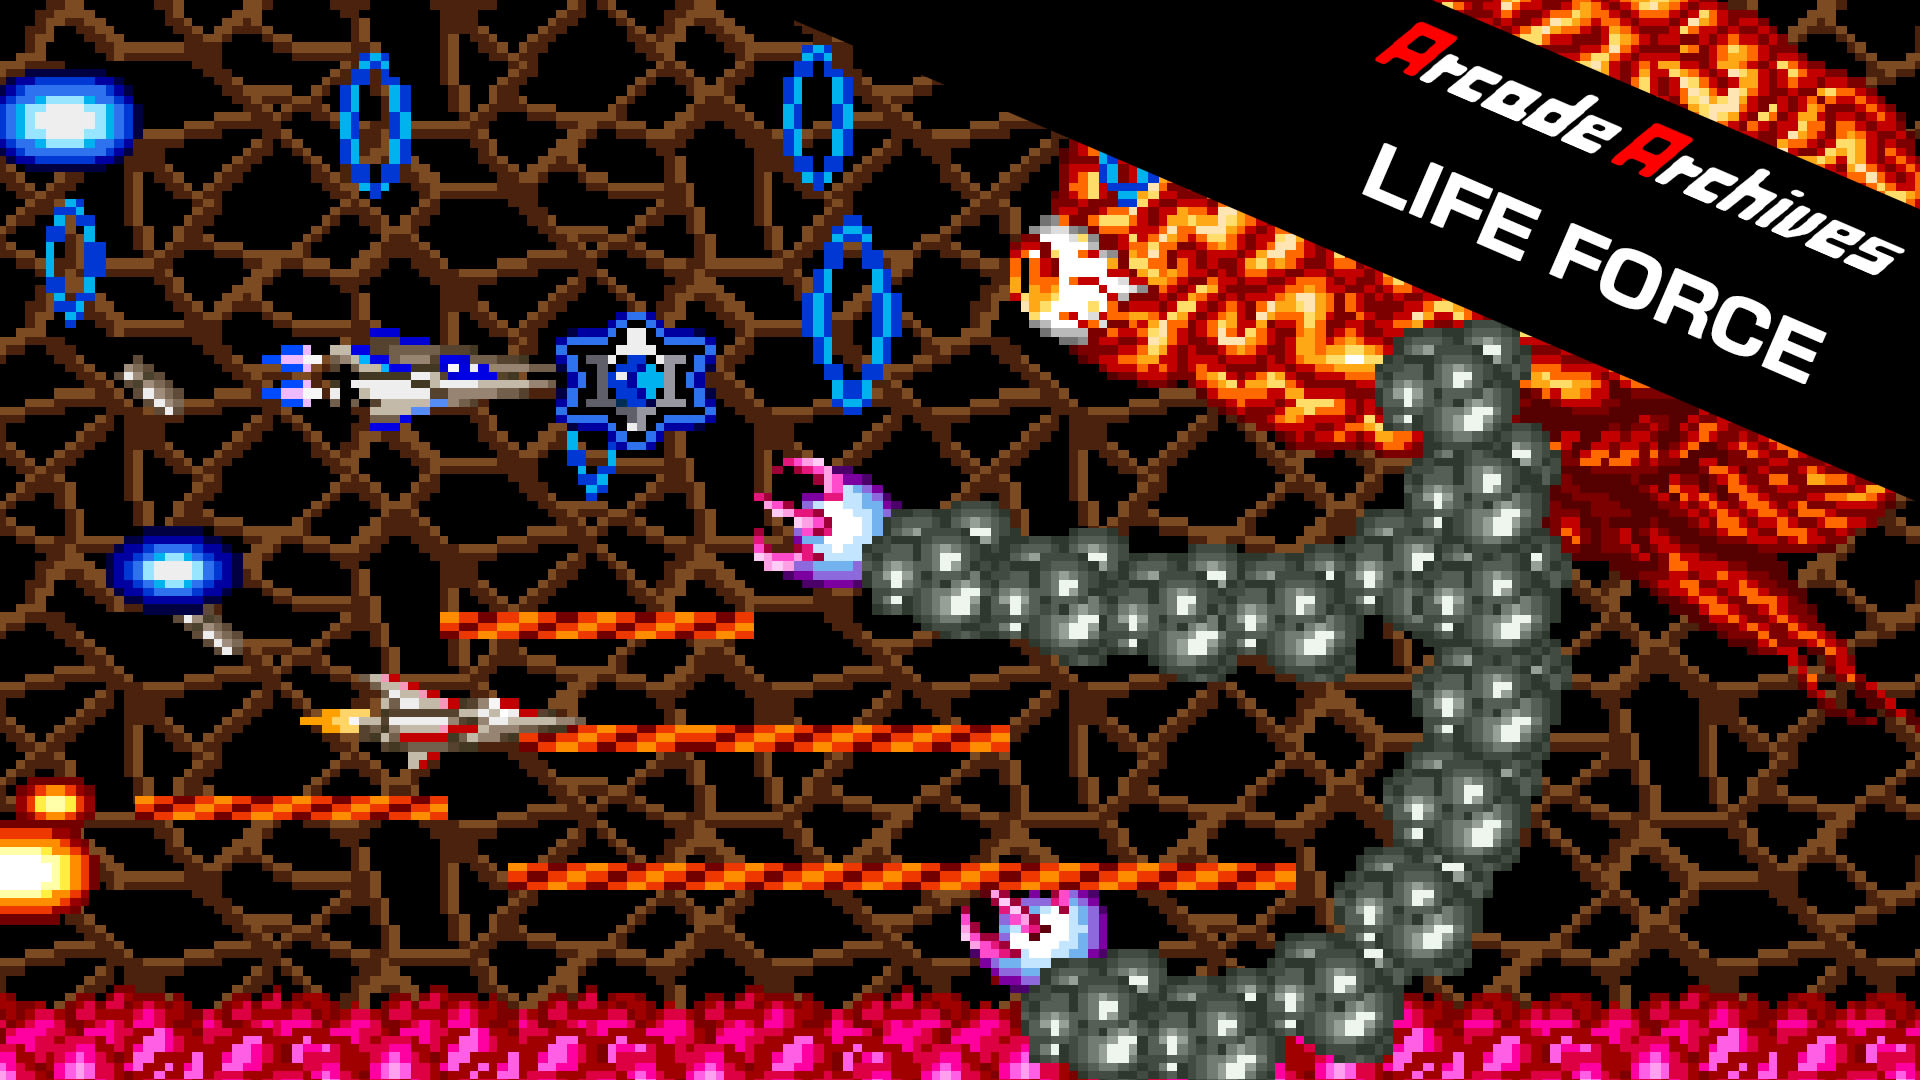 Arcade Archives LIFE FORCE 1